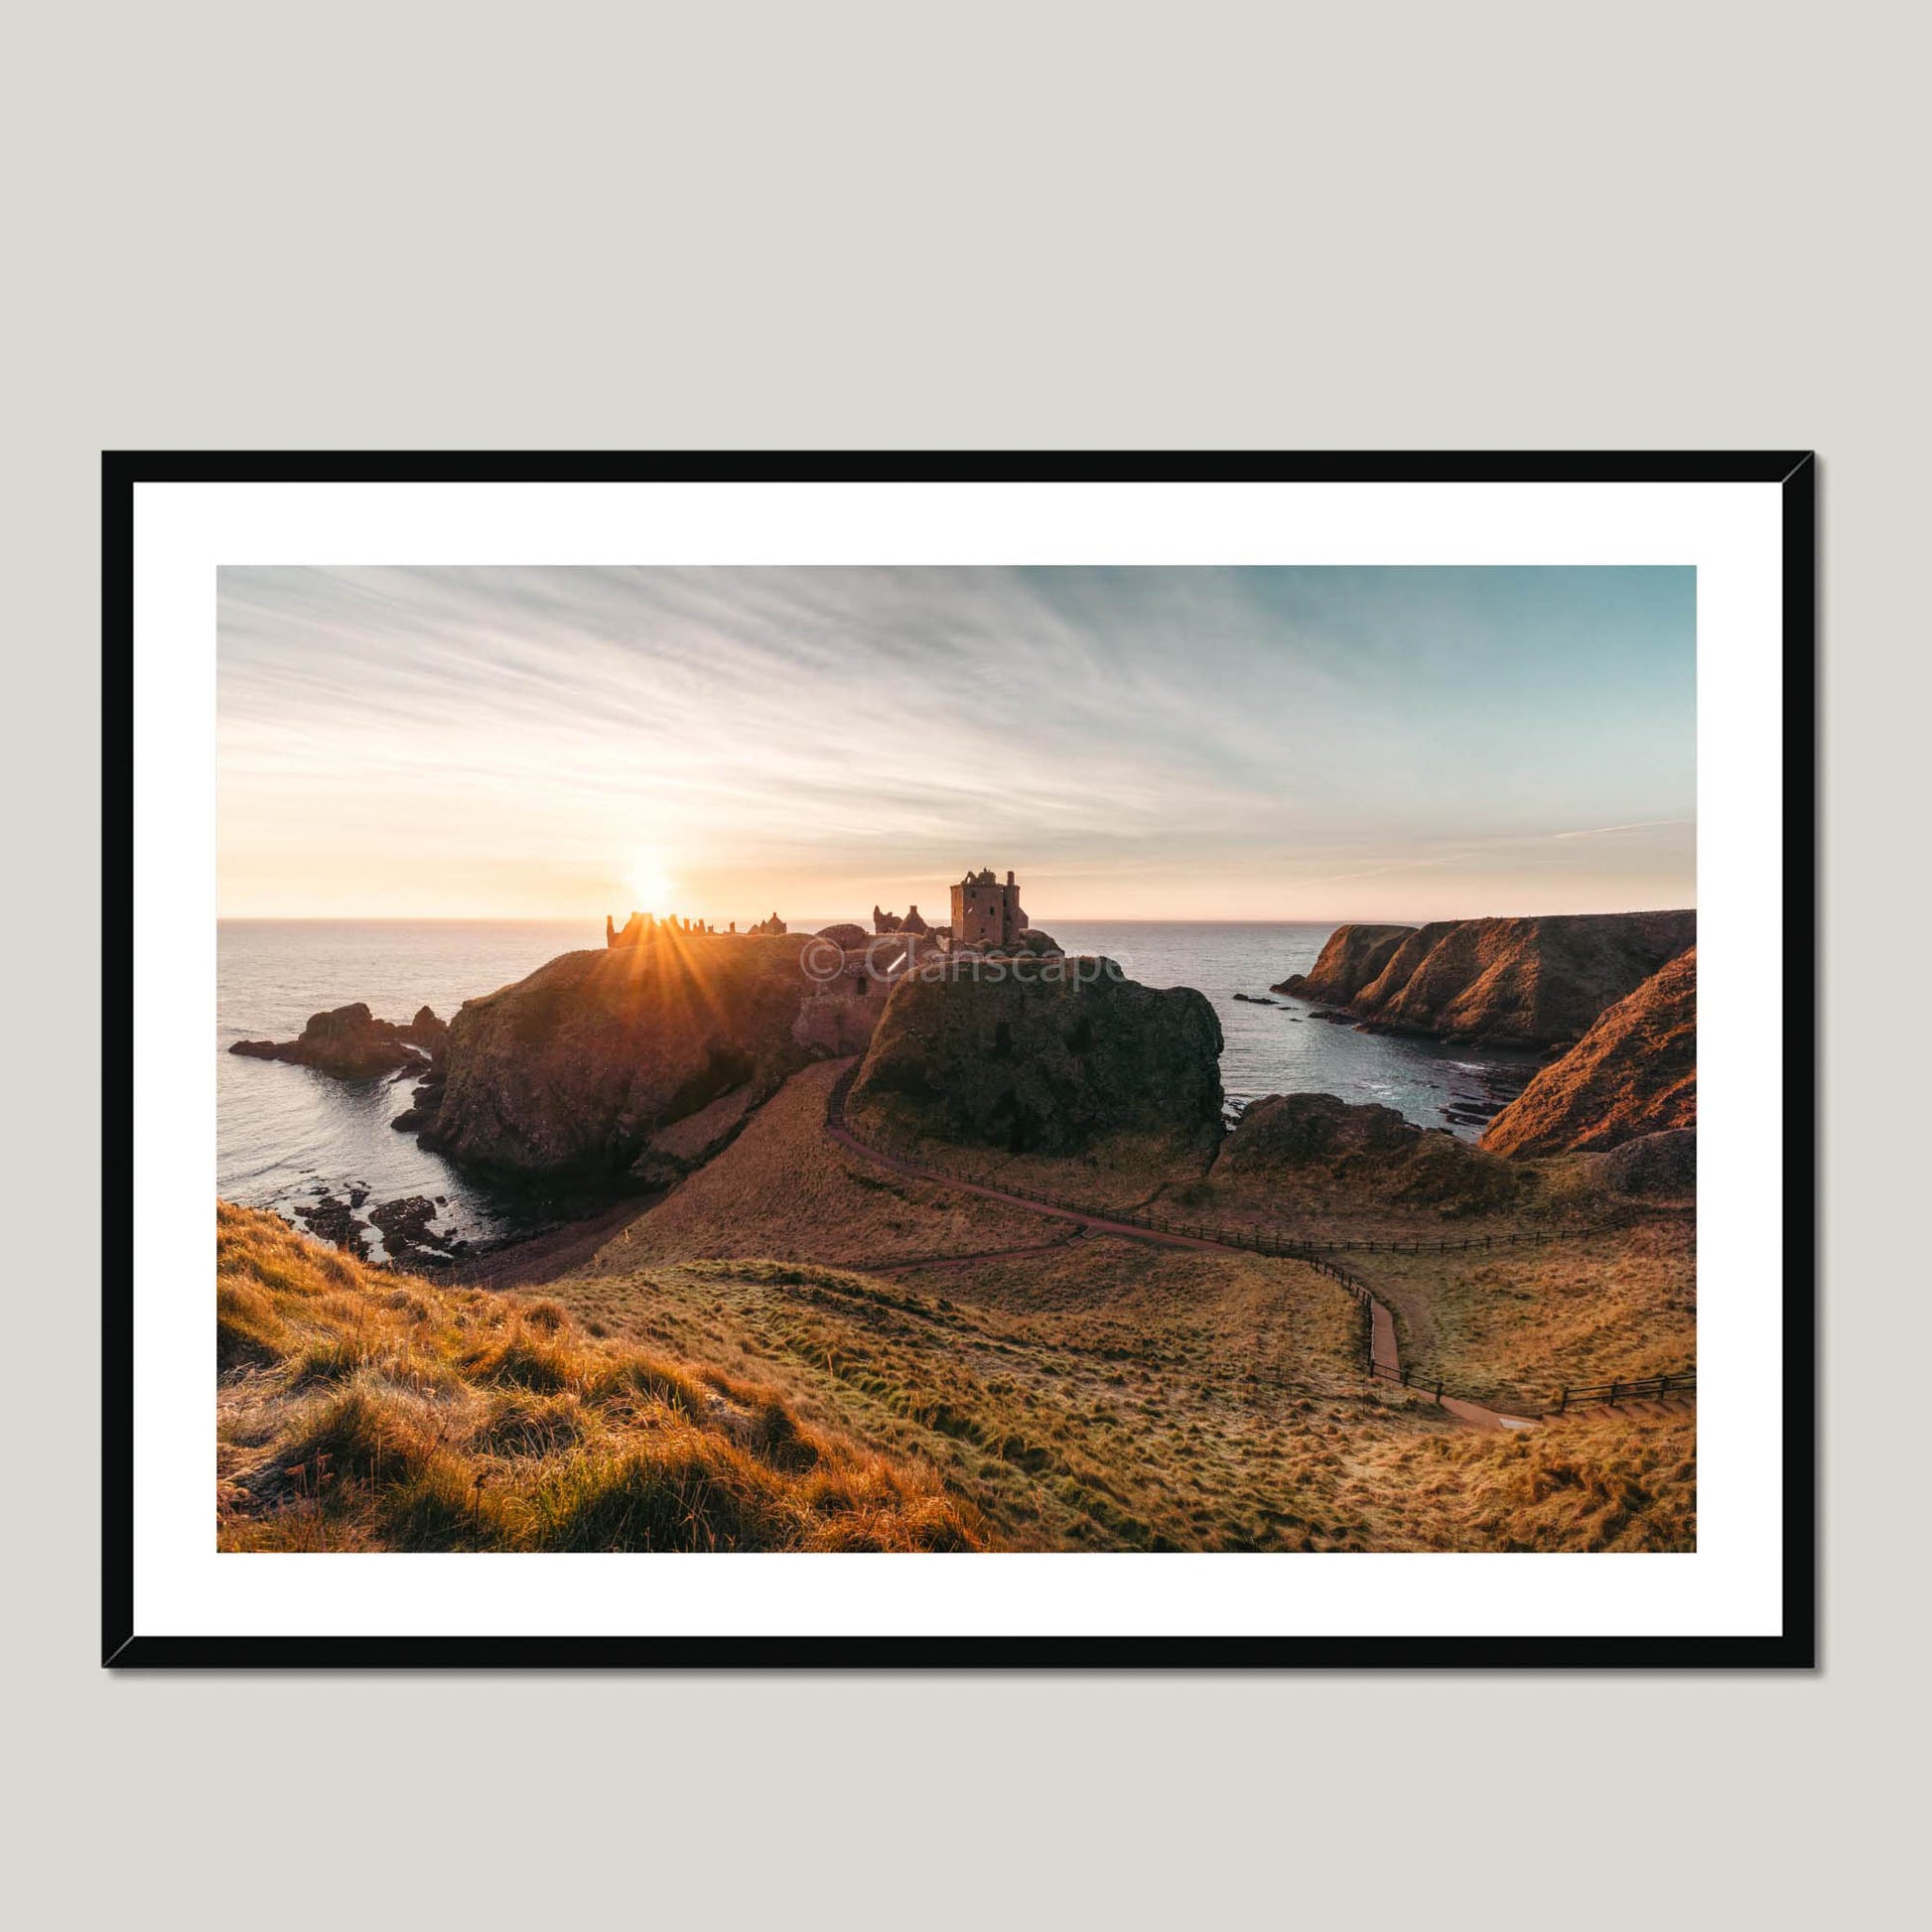 Clan Keith - Dunnotter Castle - Framed & Mounted Photo Print 40"x28" Black